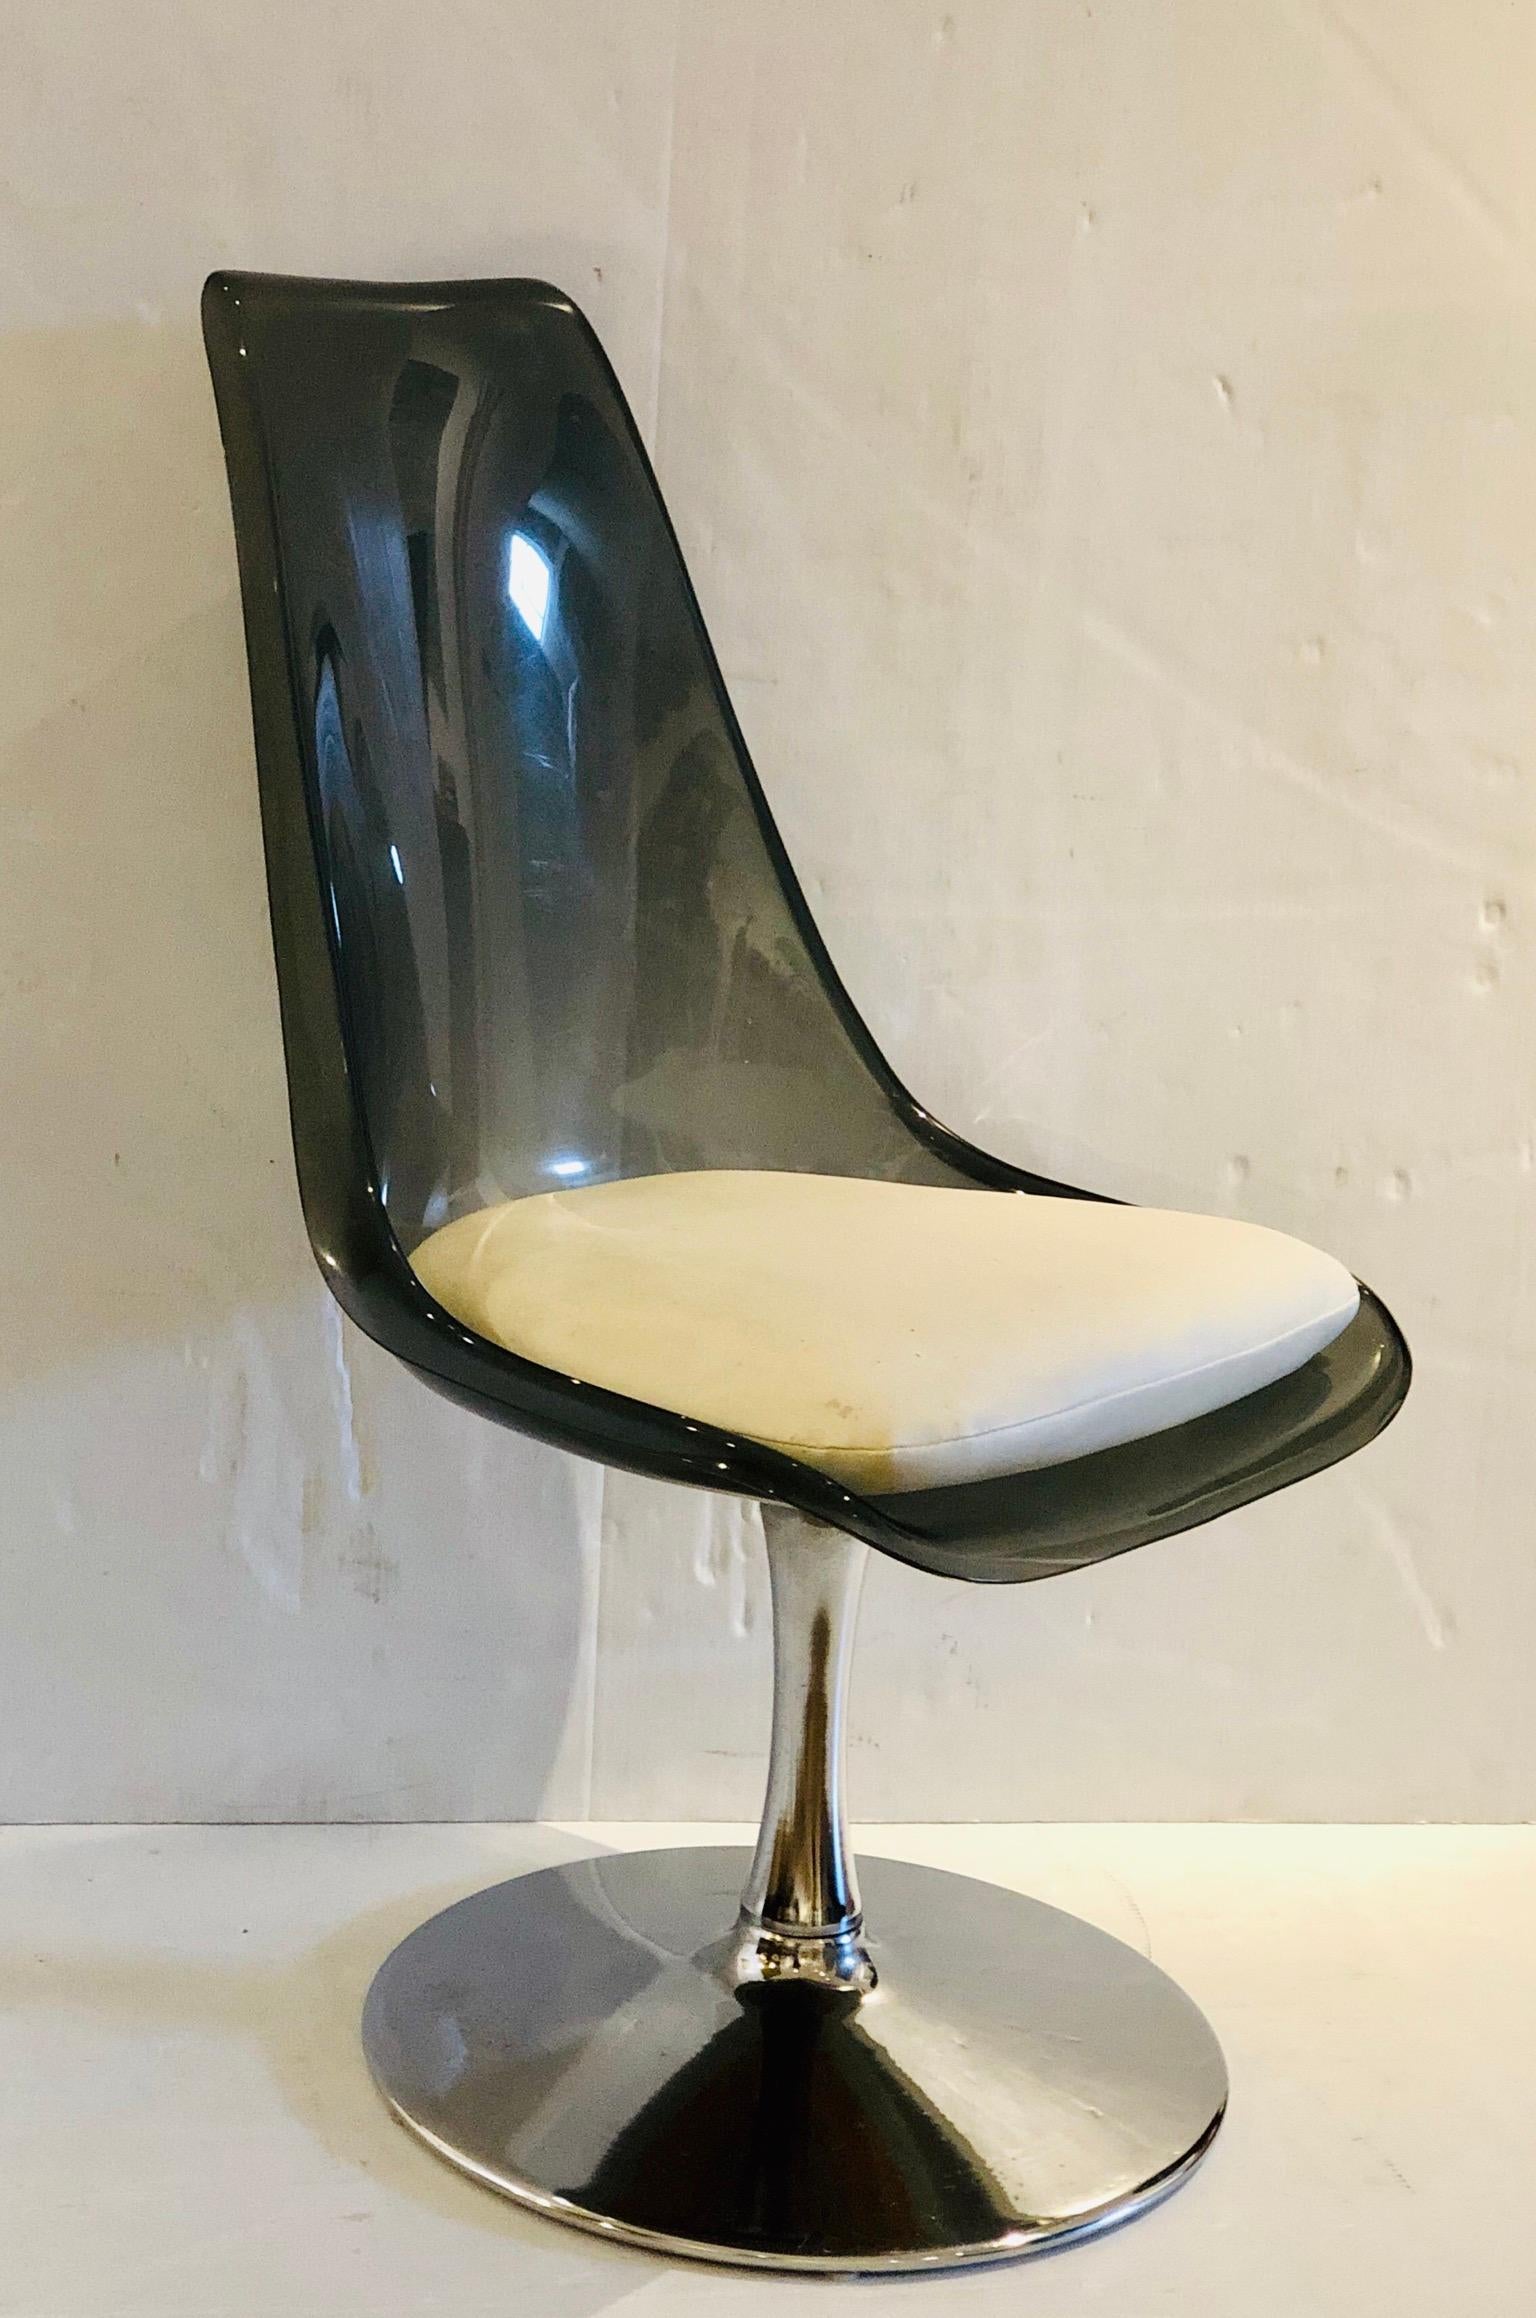 Beautiful pair of chairs in smoke Lucite top and swivel chrome base, these chairs are from the 1970s, made by Chrome craft, we have polished the base and the Lucite retains its original Naugahyde seats in white, the seats can be recovered to a